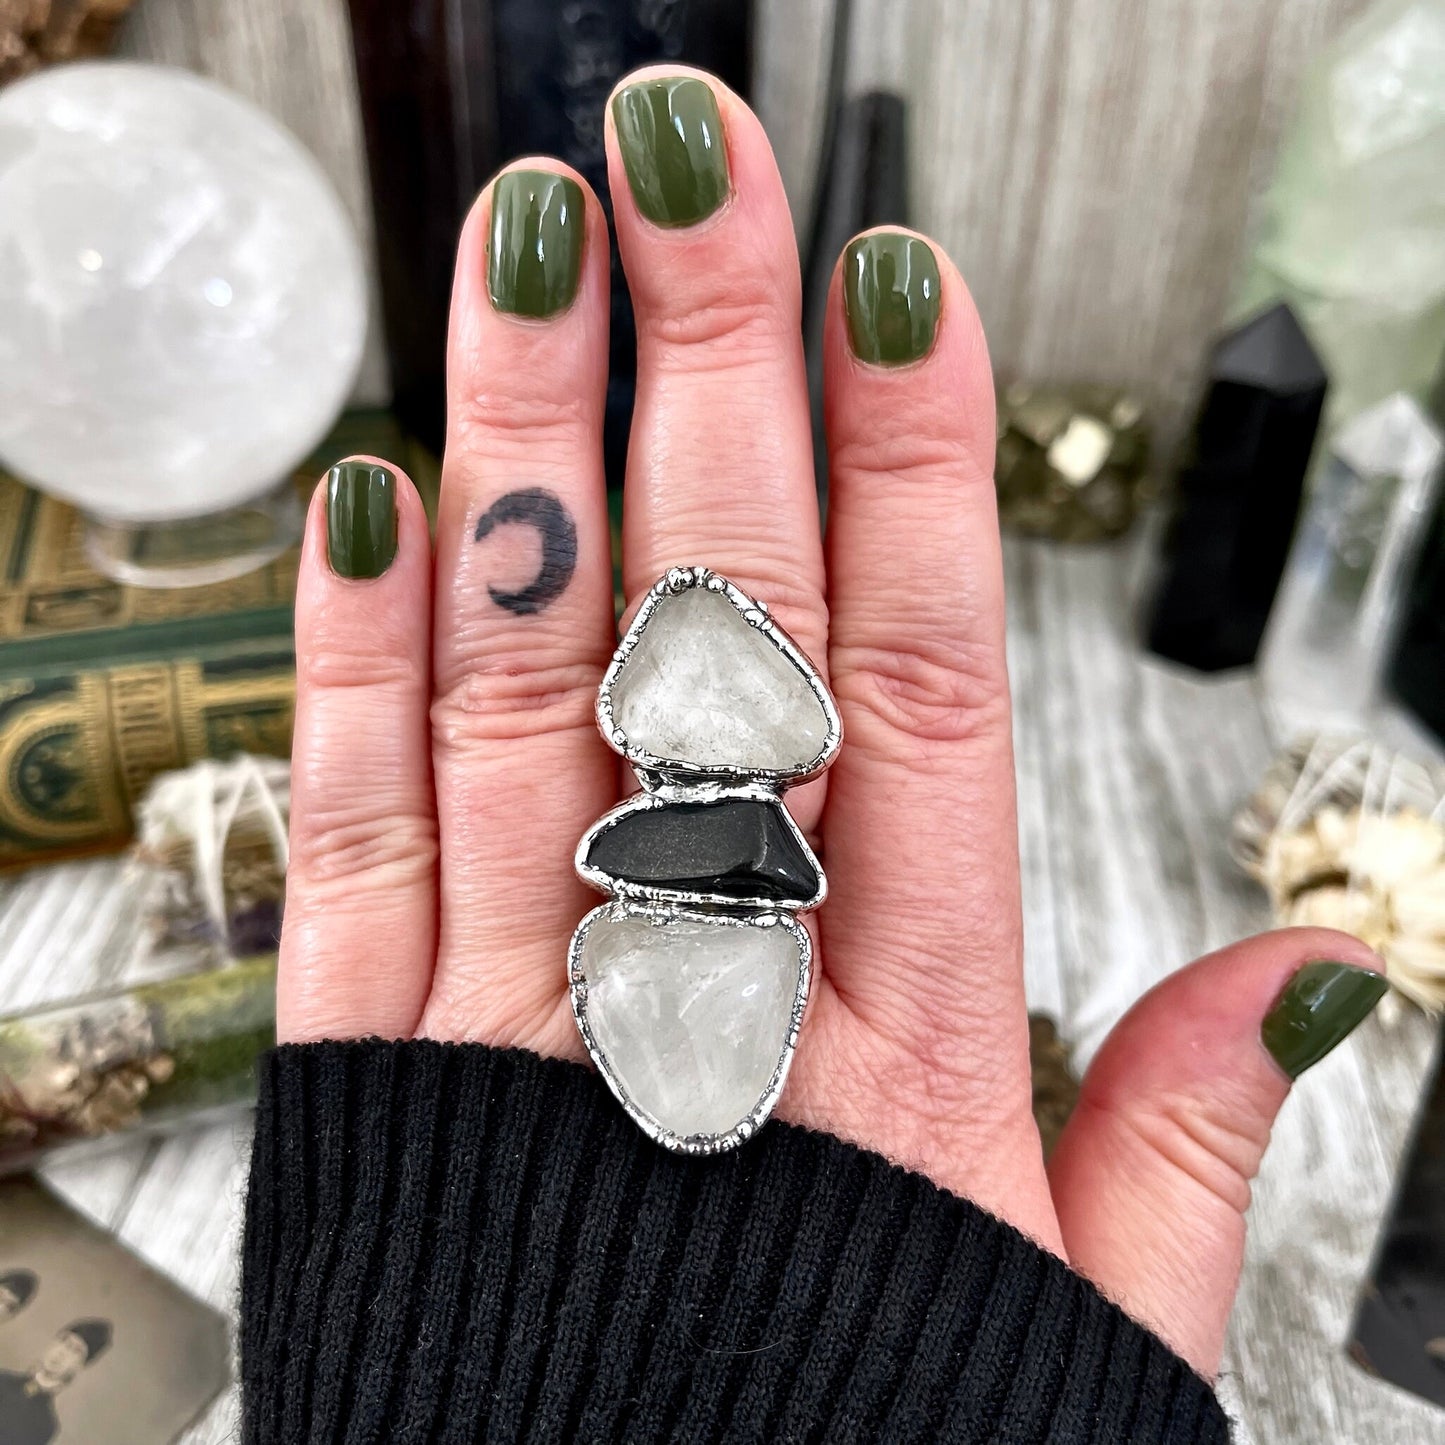 Size 8.5 Crystal Ring - Three Stone Black Onyx Clear Quartz Ring in Silver / Foxlark Collection - One of a Kind / Big Boho Crystal Jewelry